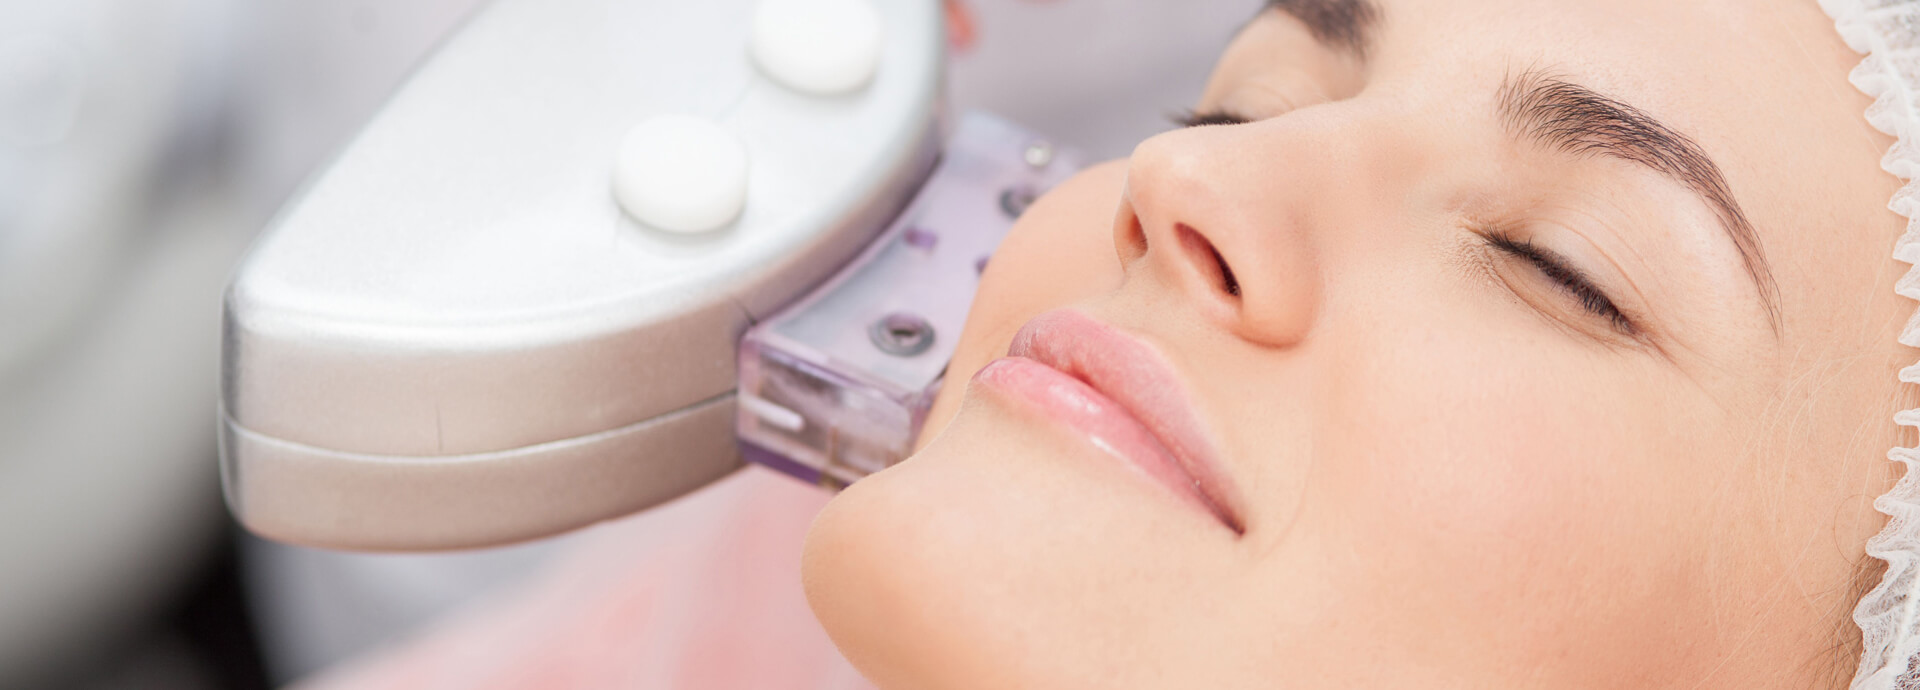 Non-Surgical Skin Treatment  Skin Tightening Treatment - Anoos